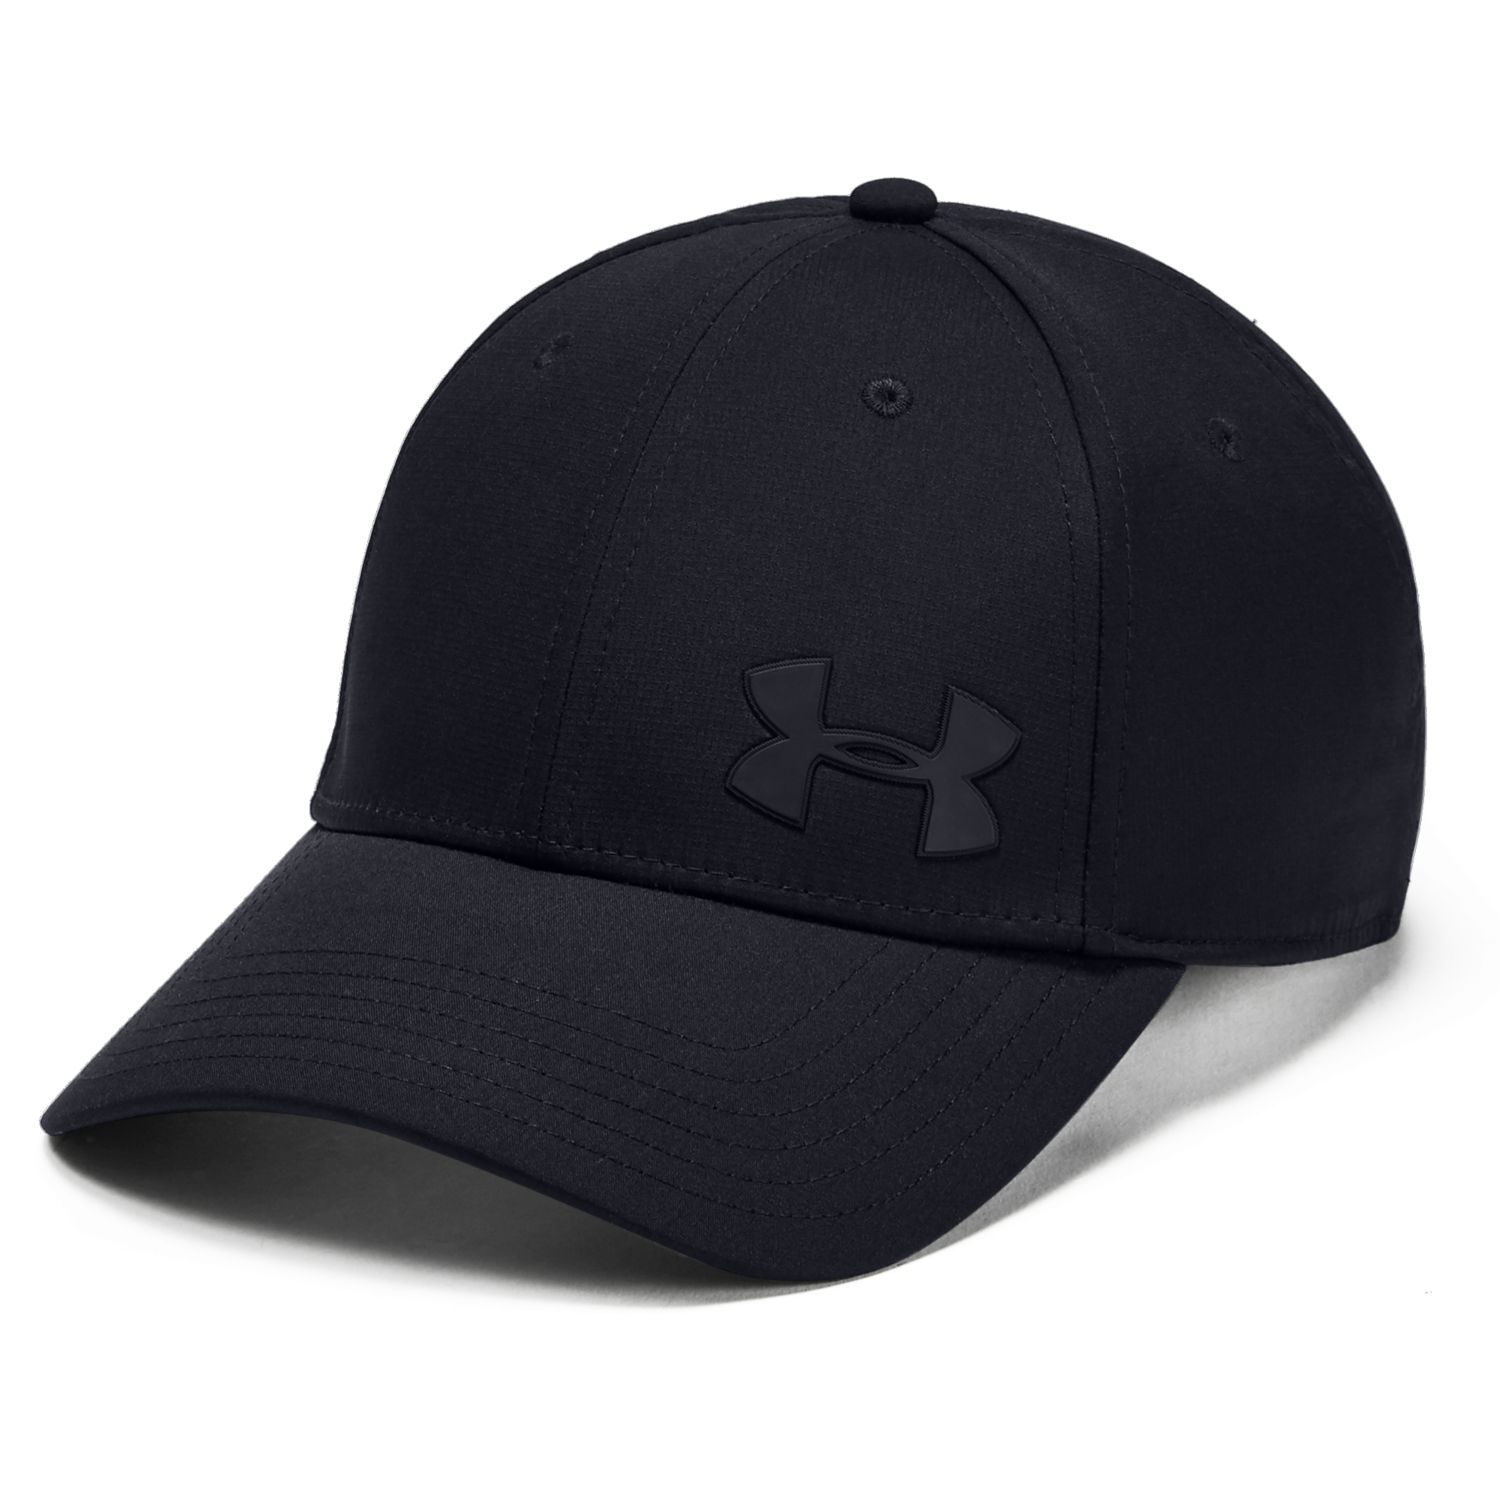 under armor hats for sale off 59% - www 